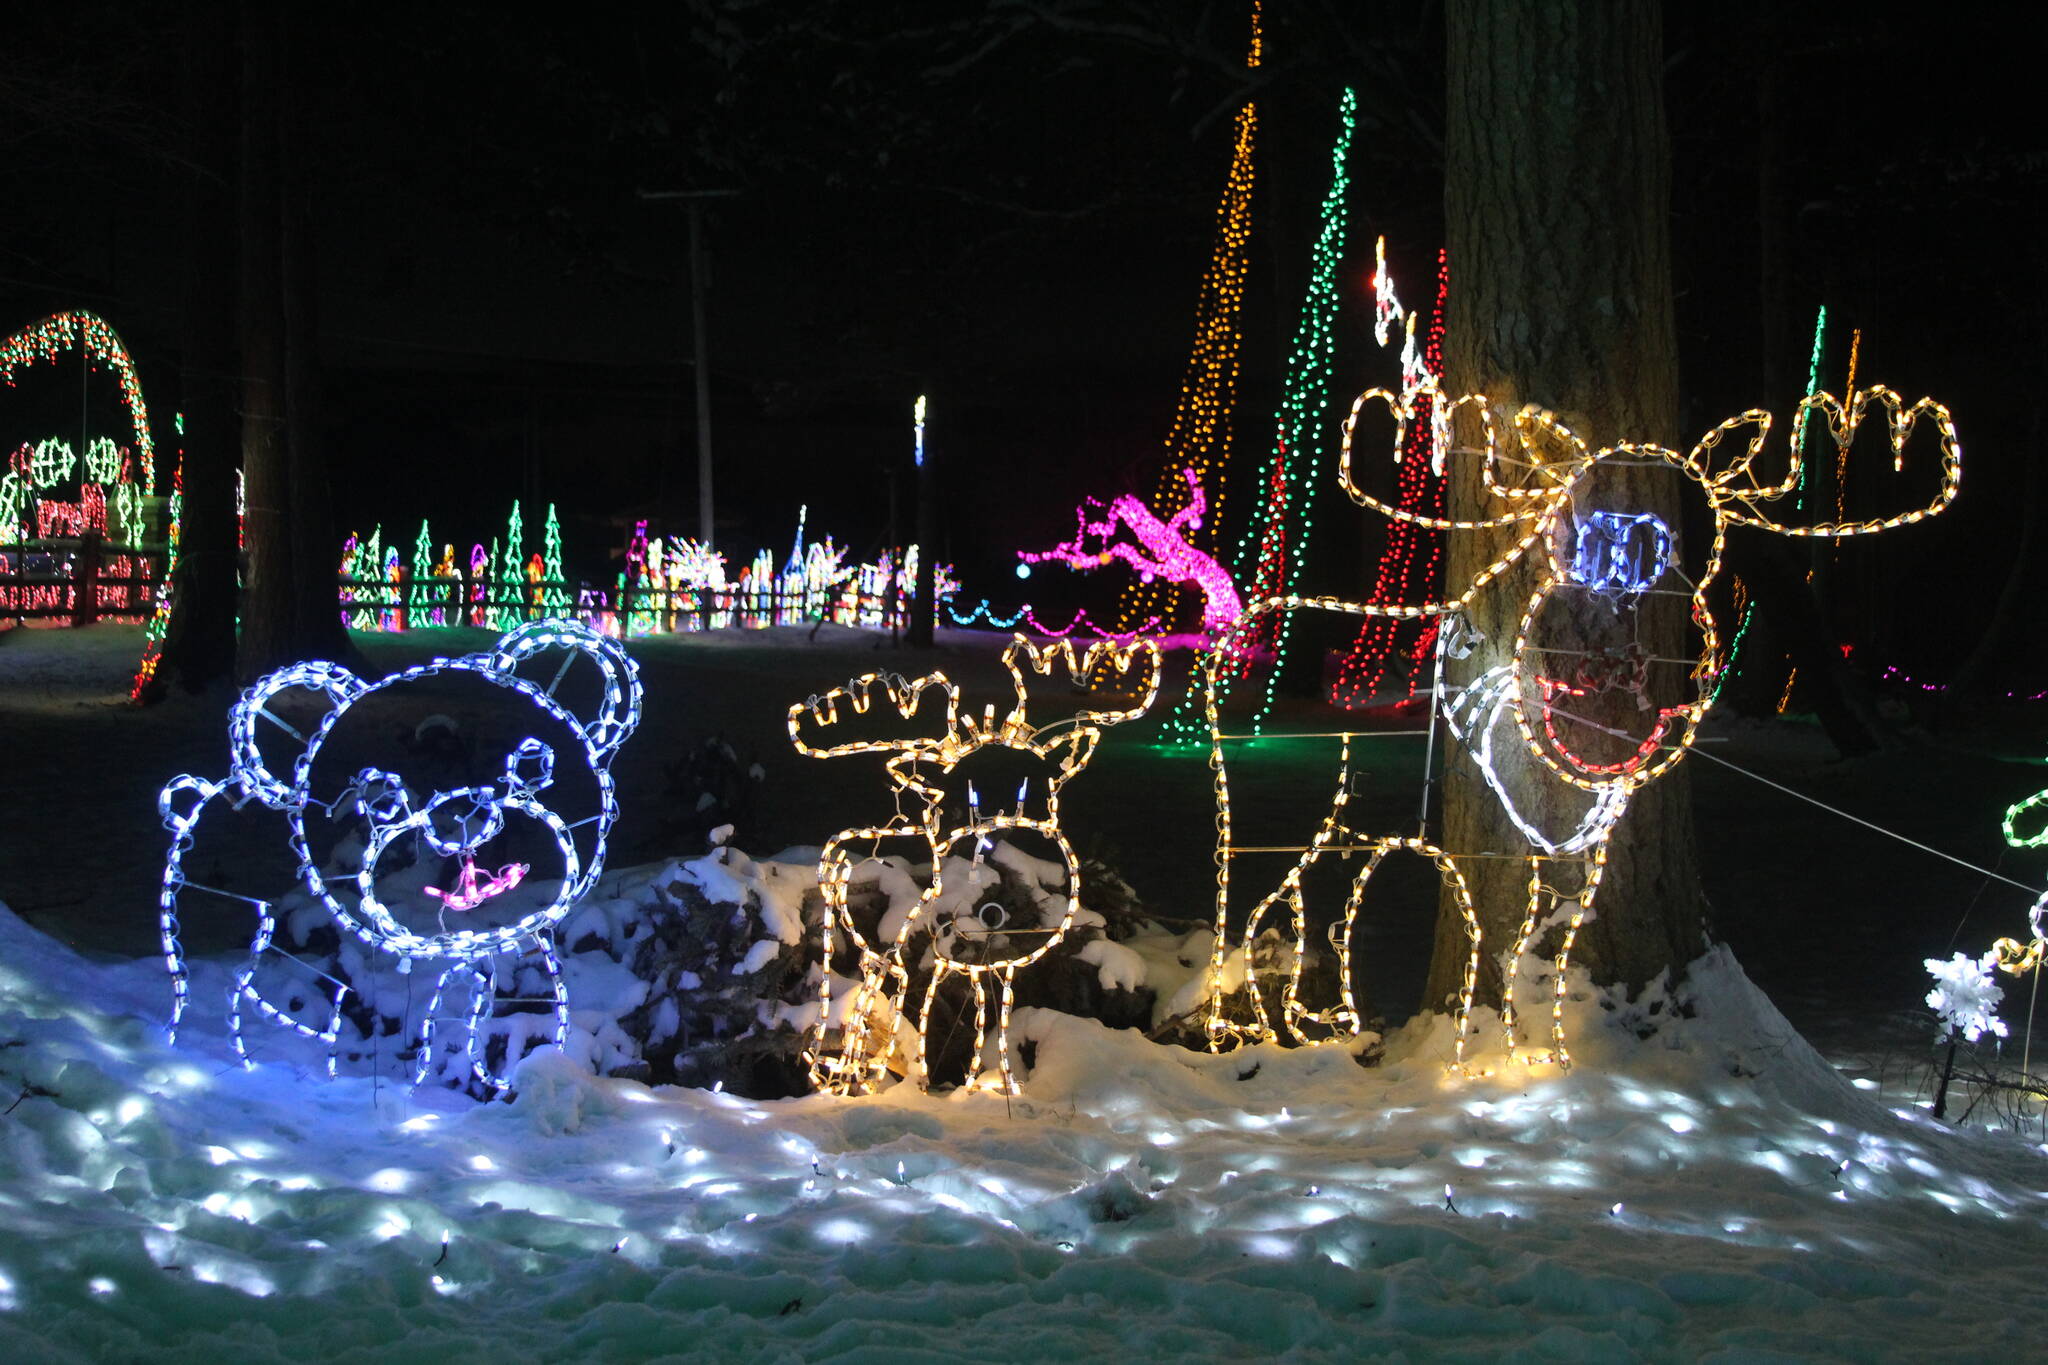 An extravagant light display at the corner of Hastie Lake Road and West Beach Road features a variety of characters, from Christmas classics like Santa Claus, reindeer and gingerbread people to less conventional holiday friends like dinosaurs, sea monsters and orcas. (Photo by Karina Andrew/Whidbey News-Times)